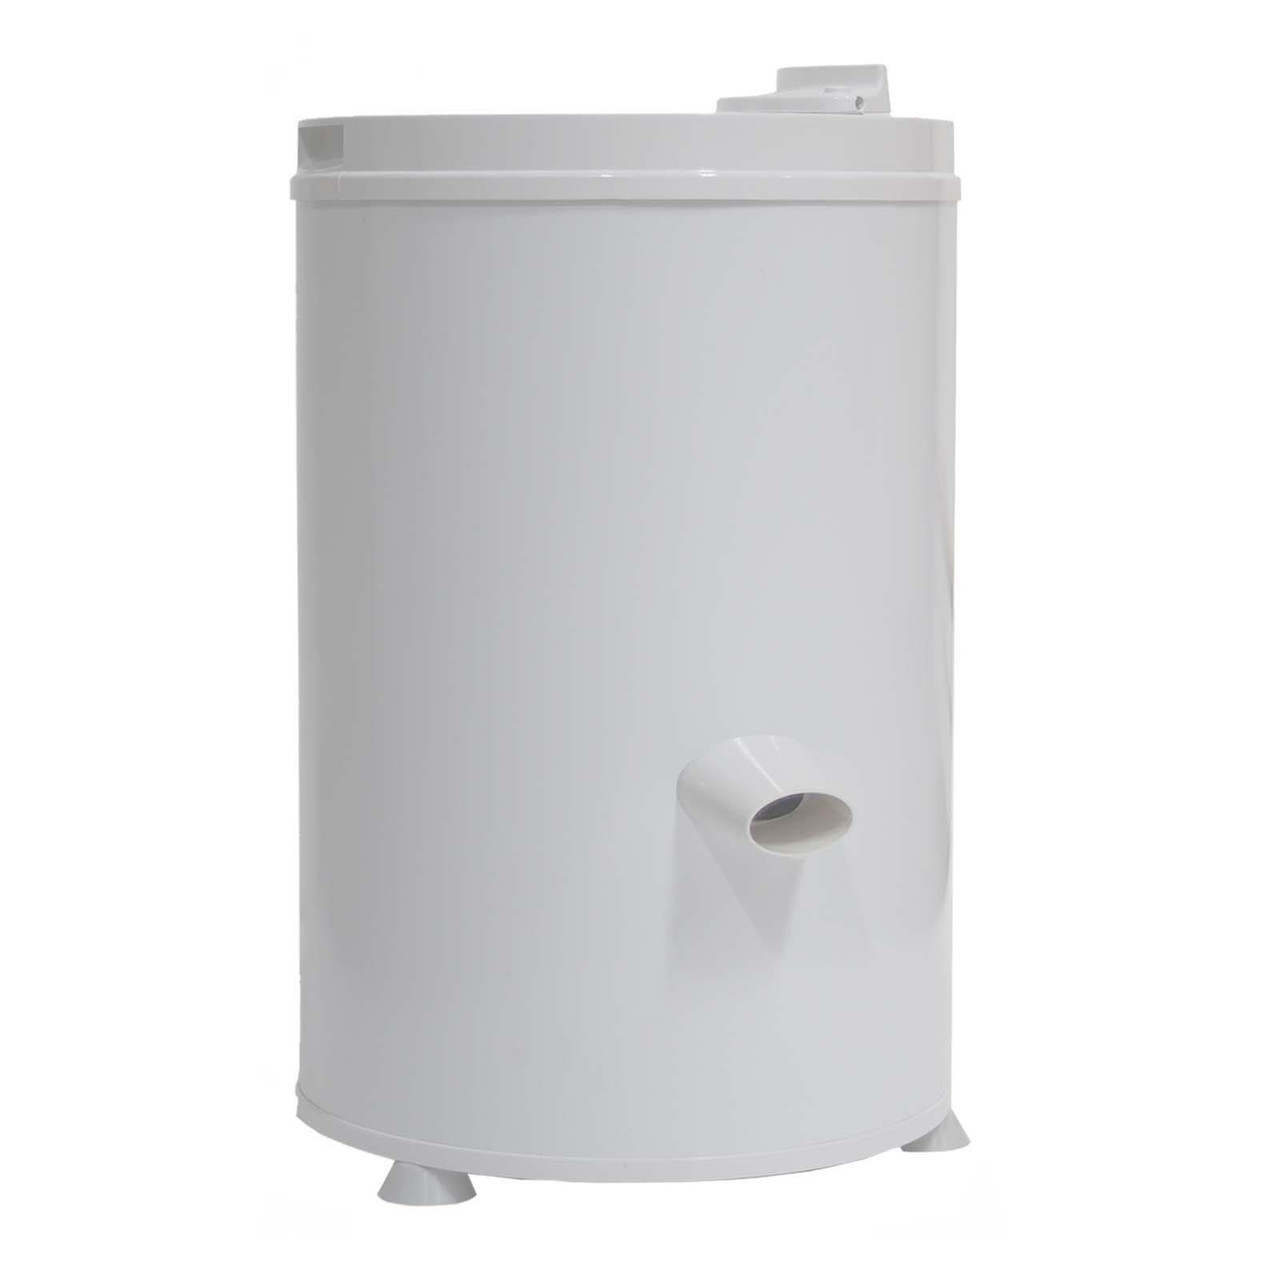 Image of 3kg Gravity Spin Dryer In White 2800rpm, 350W - SIA SD3WH